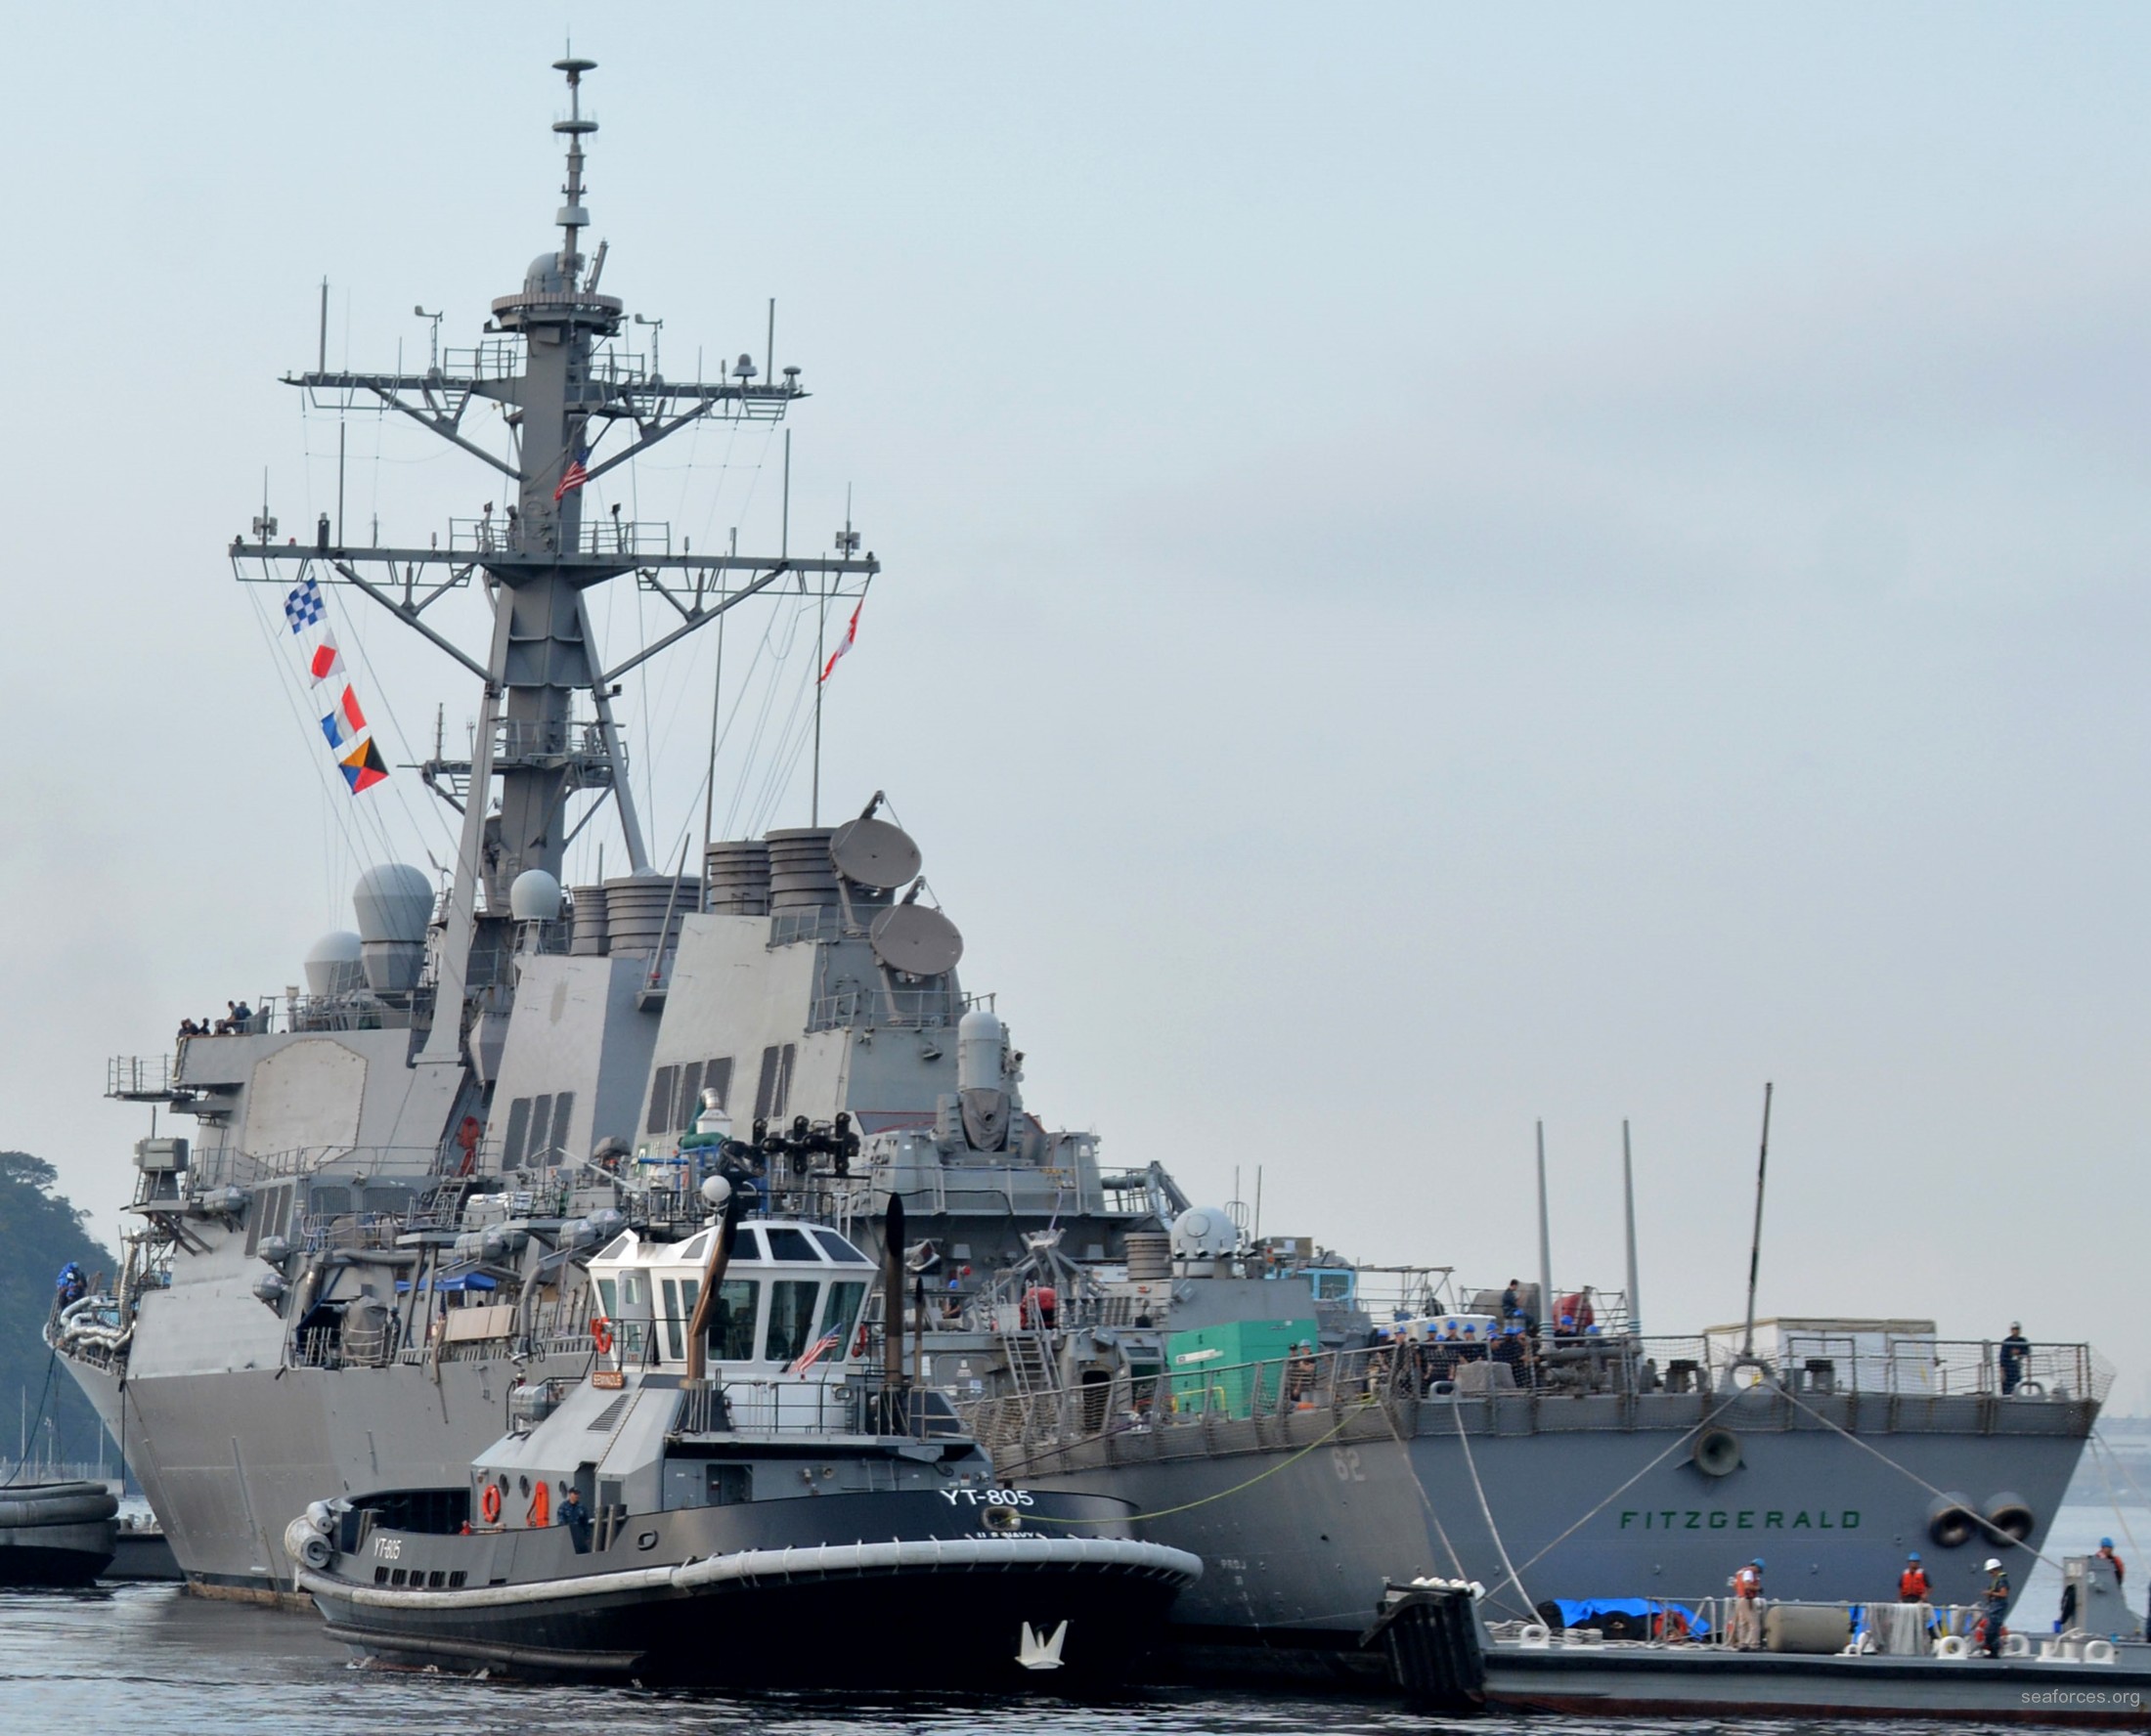 ddg-62 uss fitzgerald guided missile destroyer us navy 142 arleigh burke class